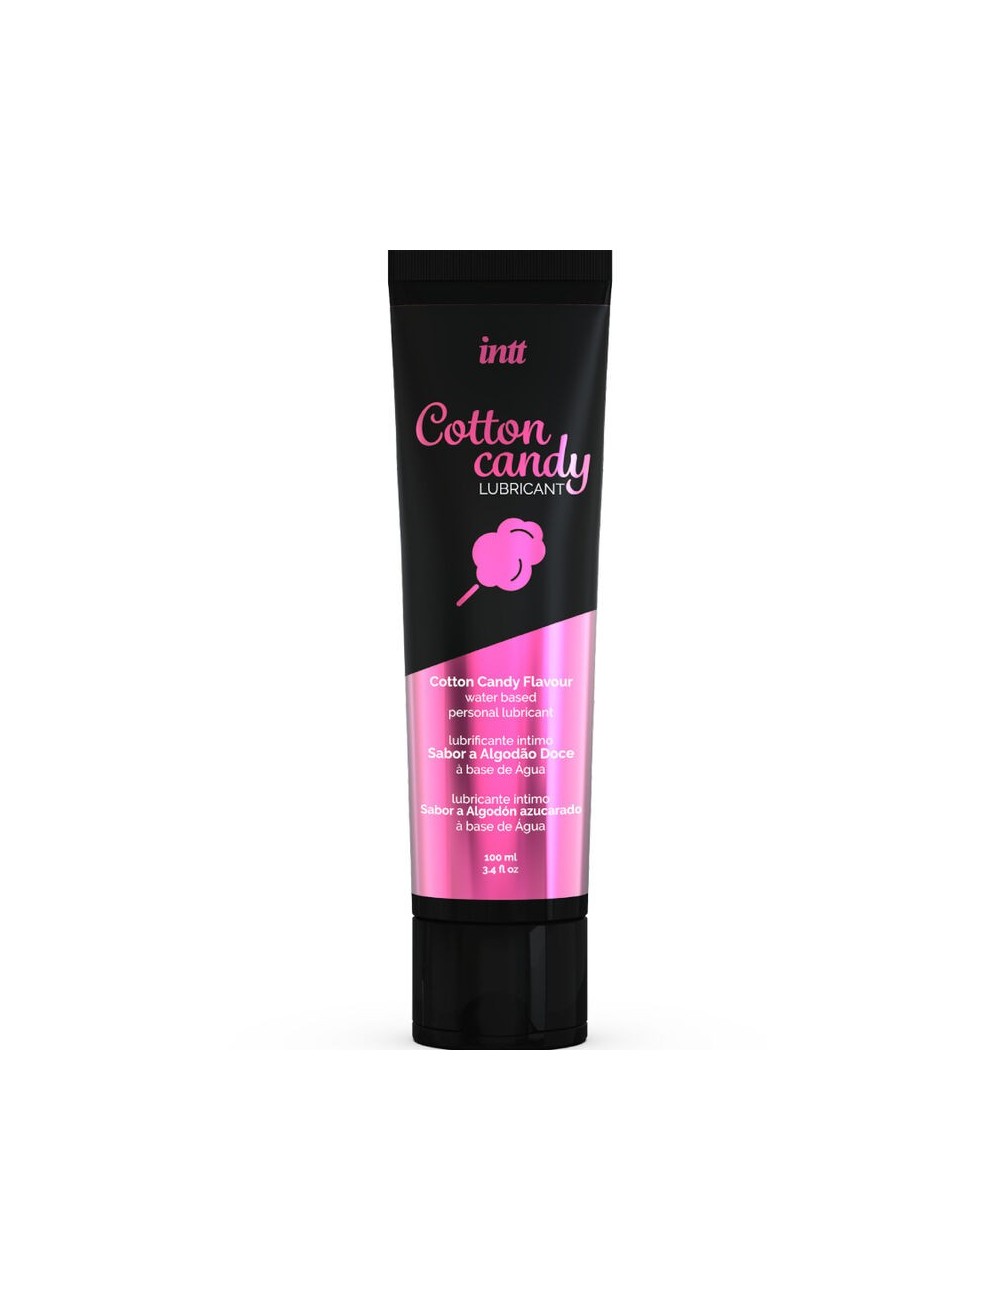 INTT - INTIMATE WATER-BASED LUBRICANT DELICIOUS COTTON SWEET FLAVOR